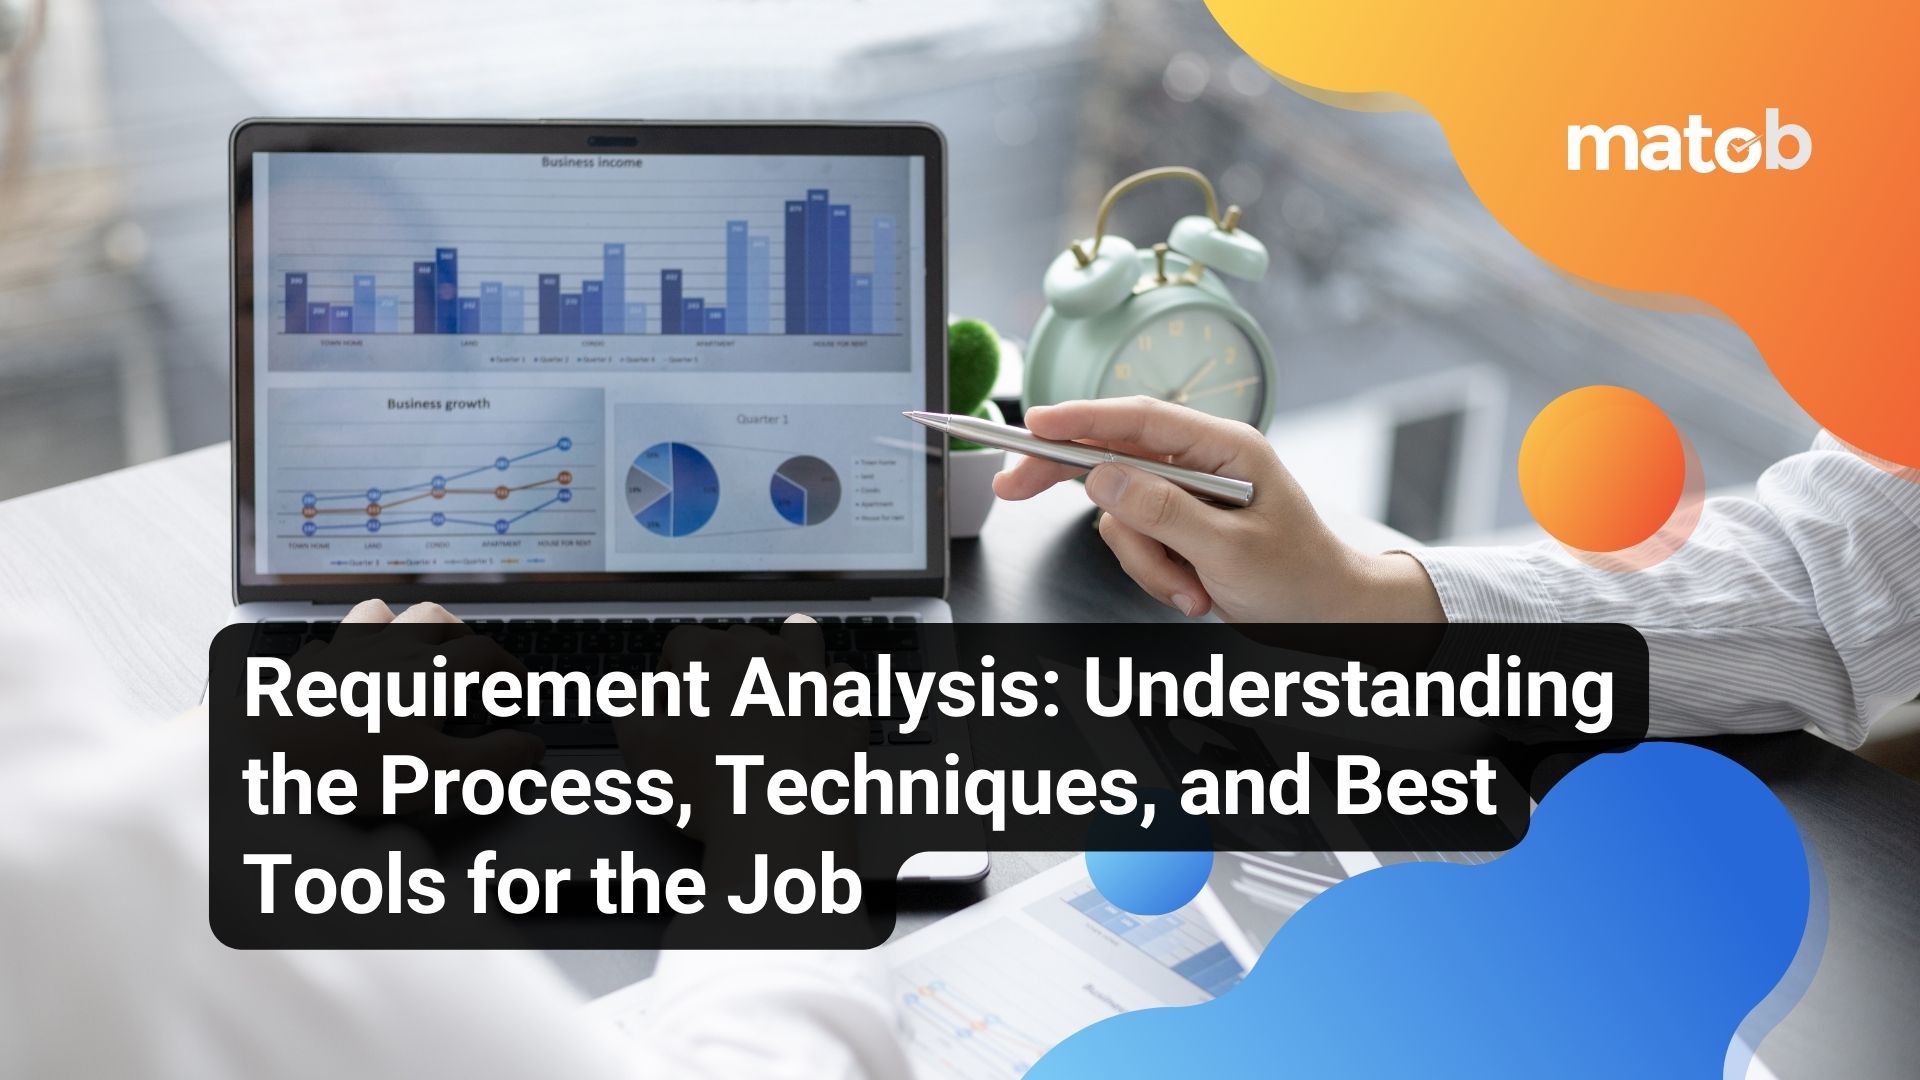 Requirement Analysis: Understanding the Process, Techniques, and Best Tools for the Job